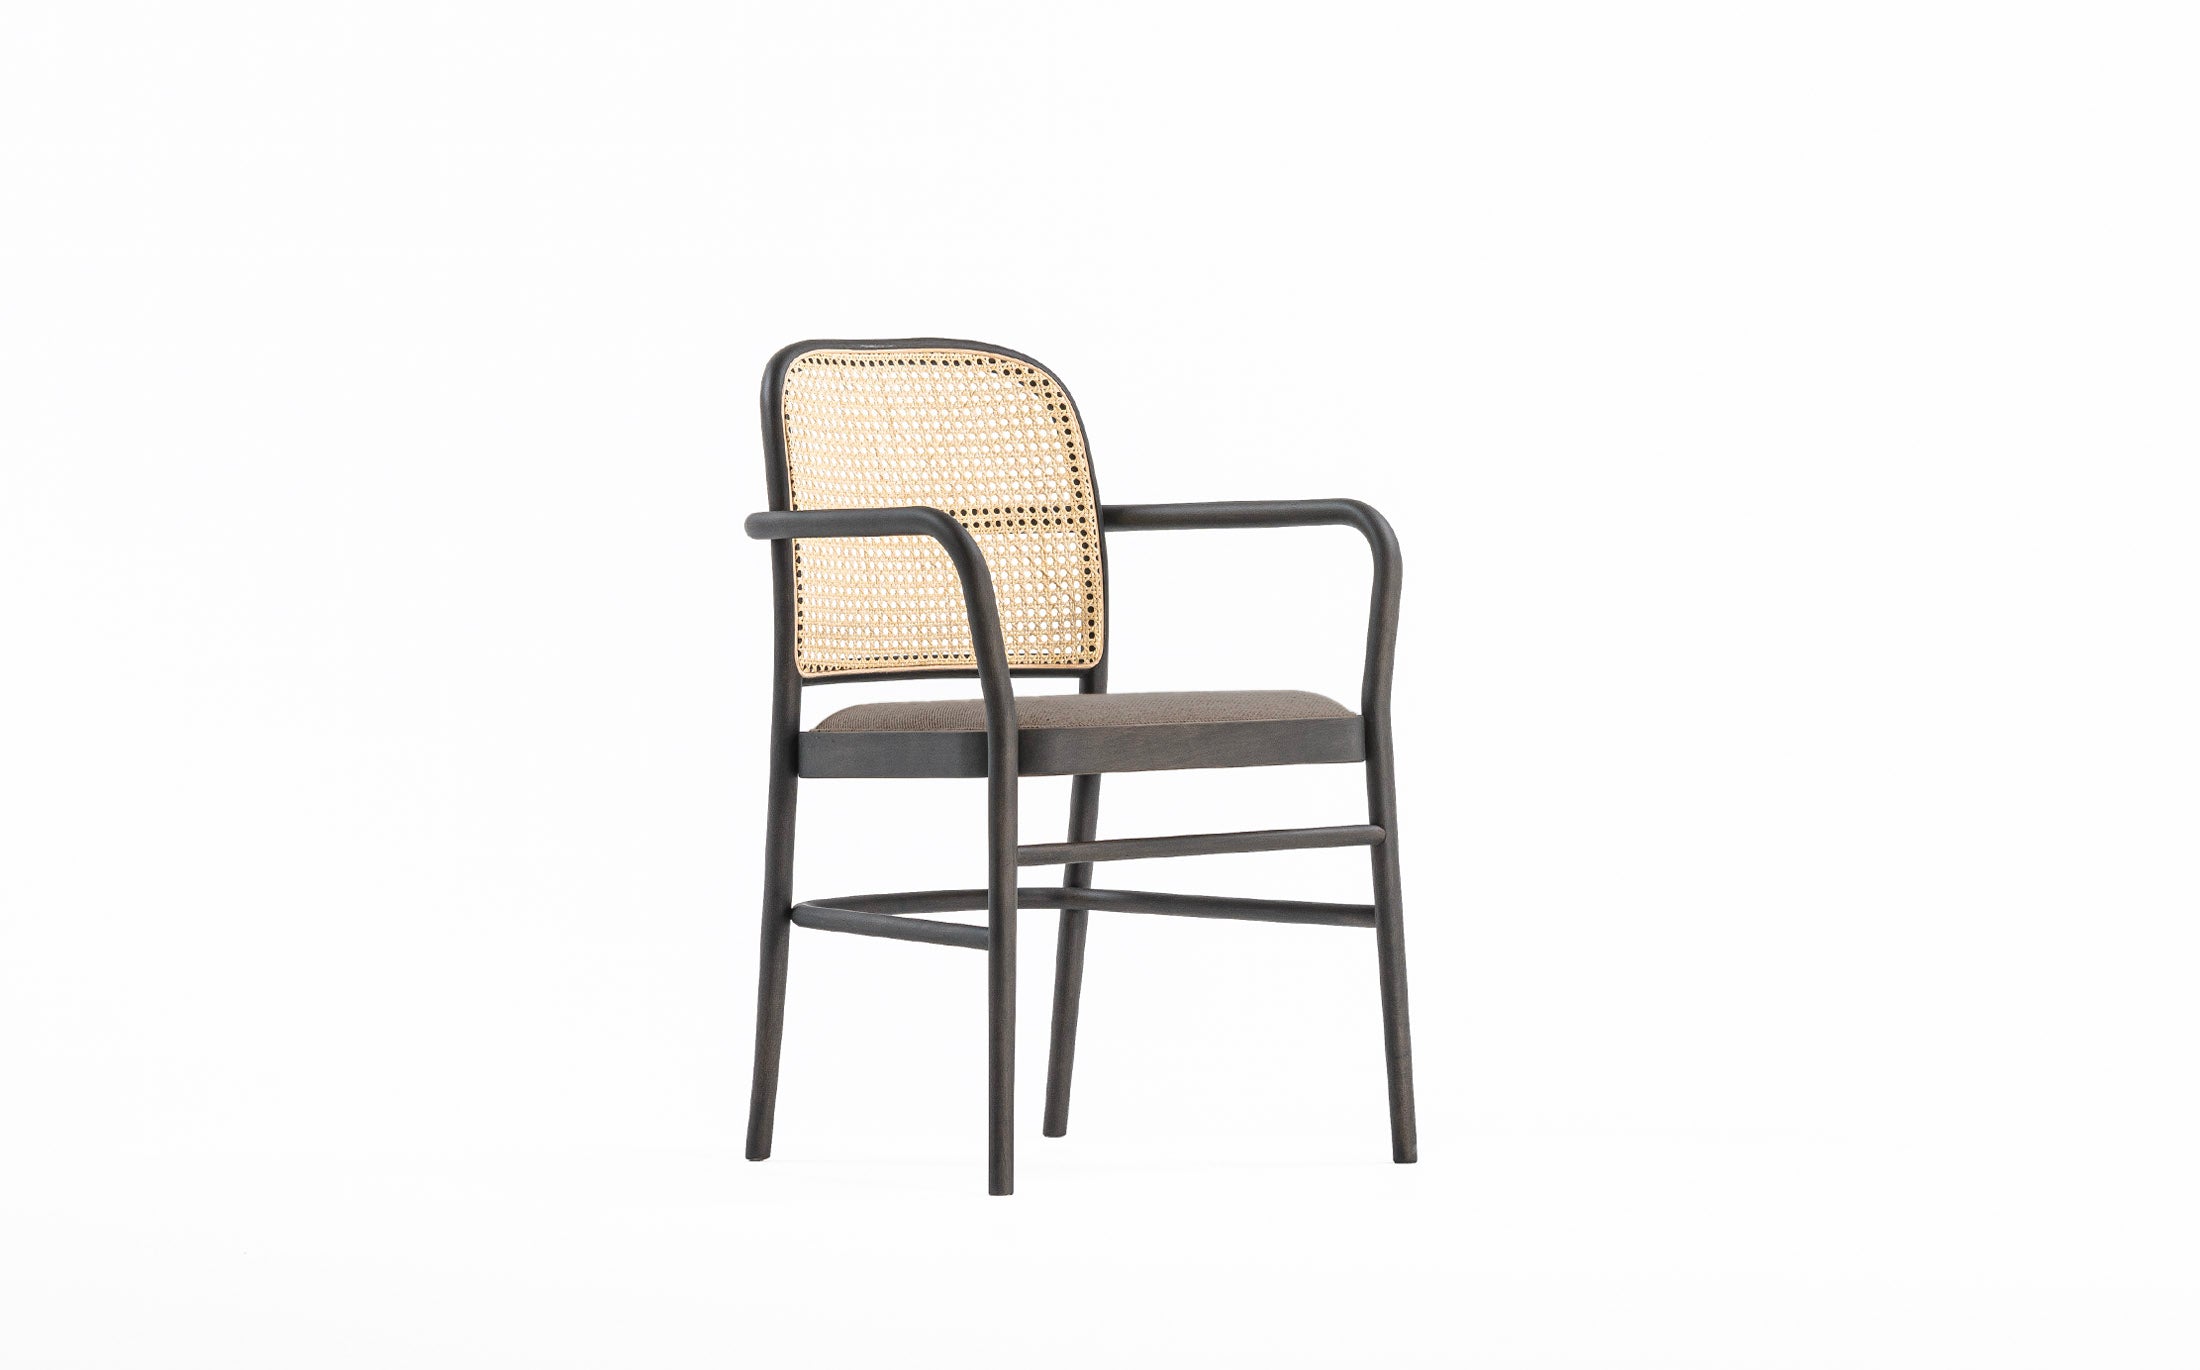 The bent armchair - Charcoal grey